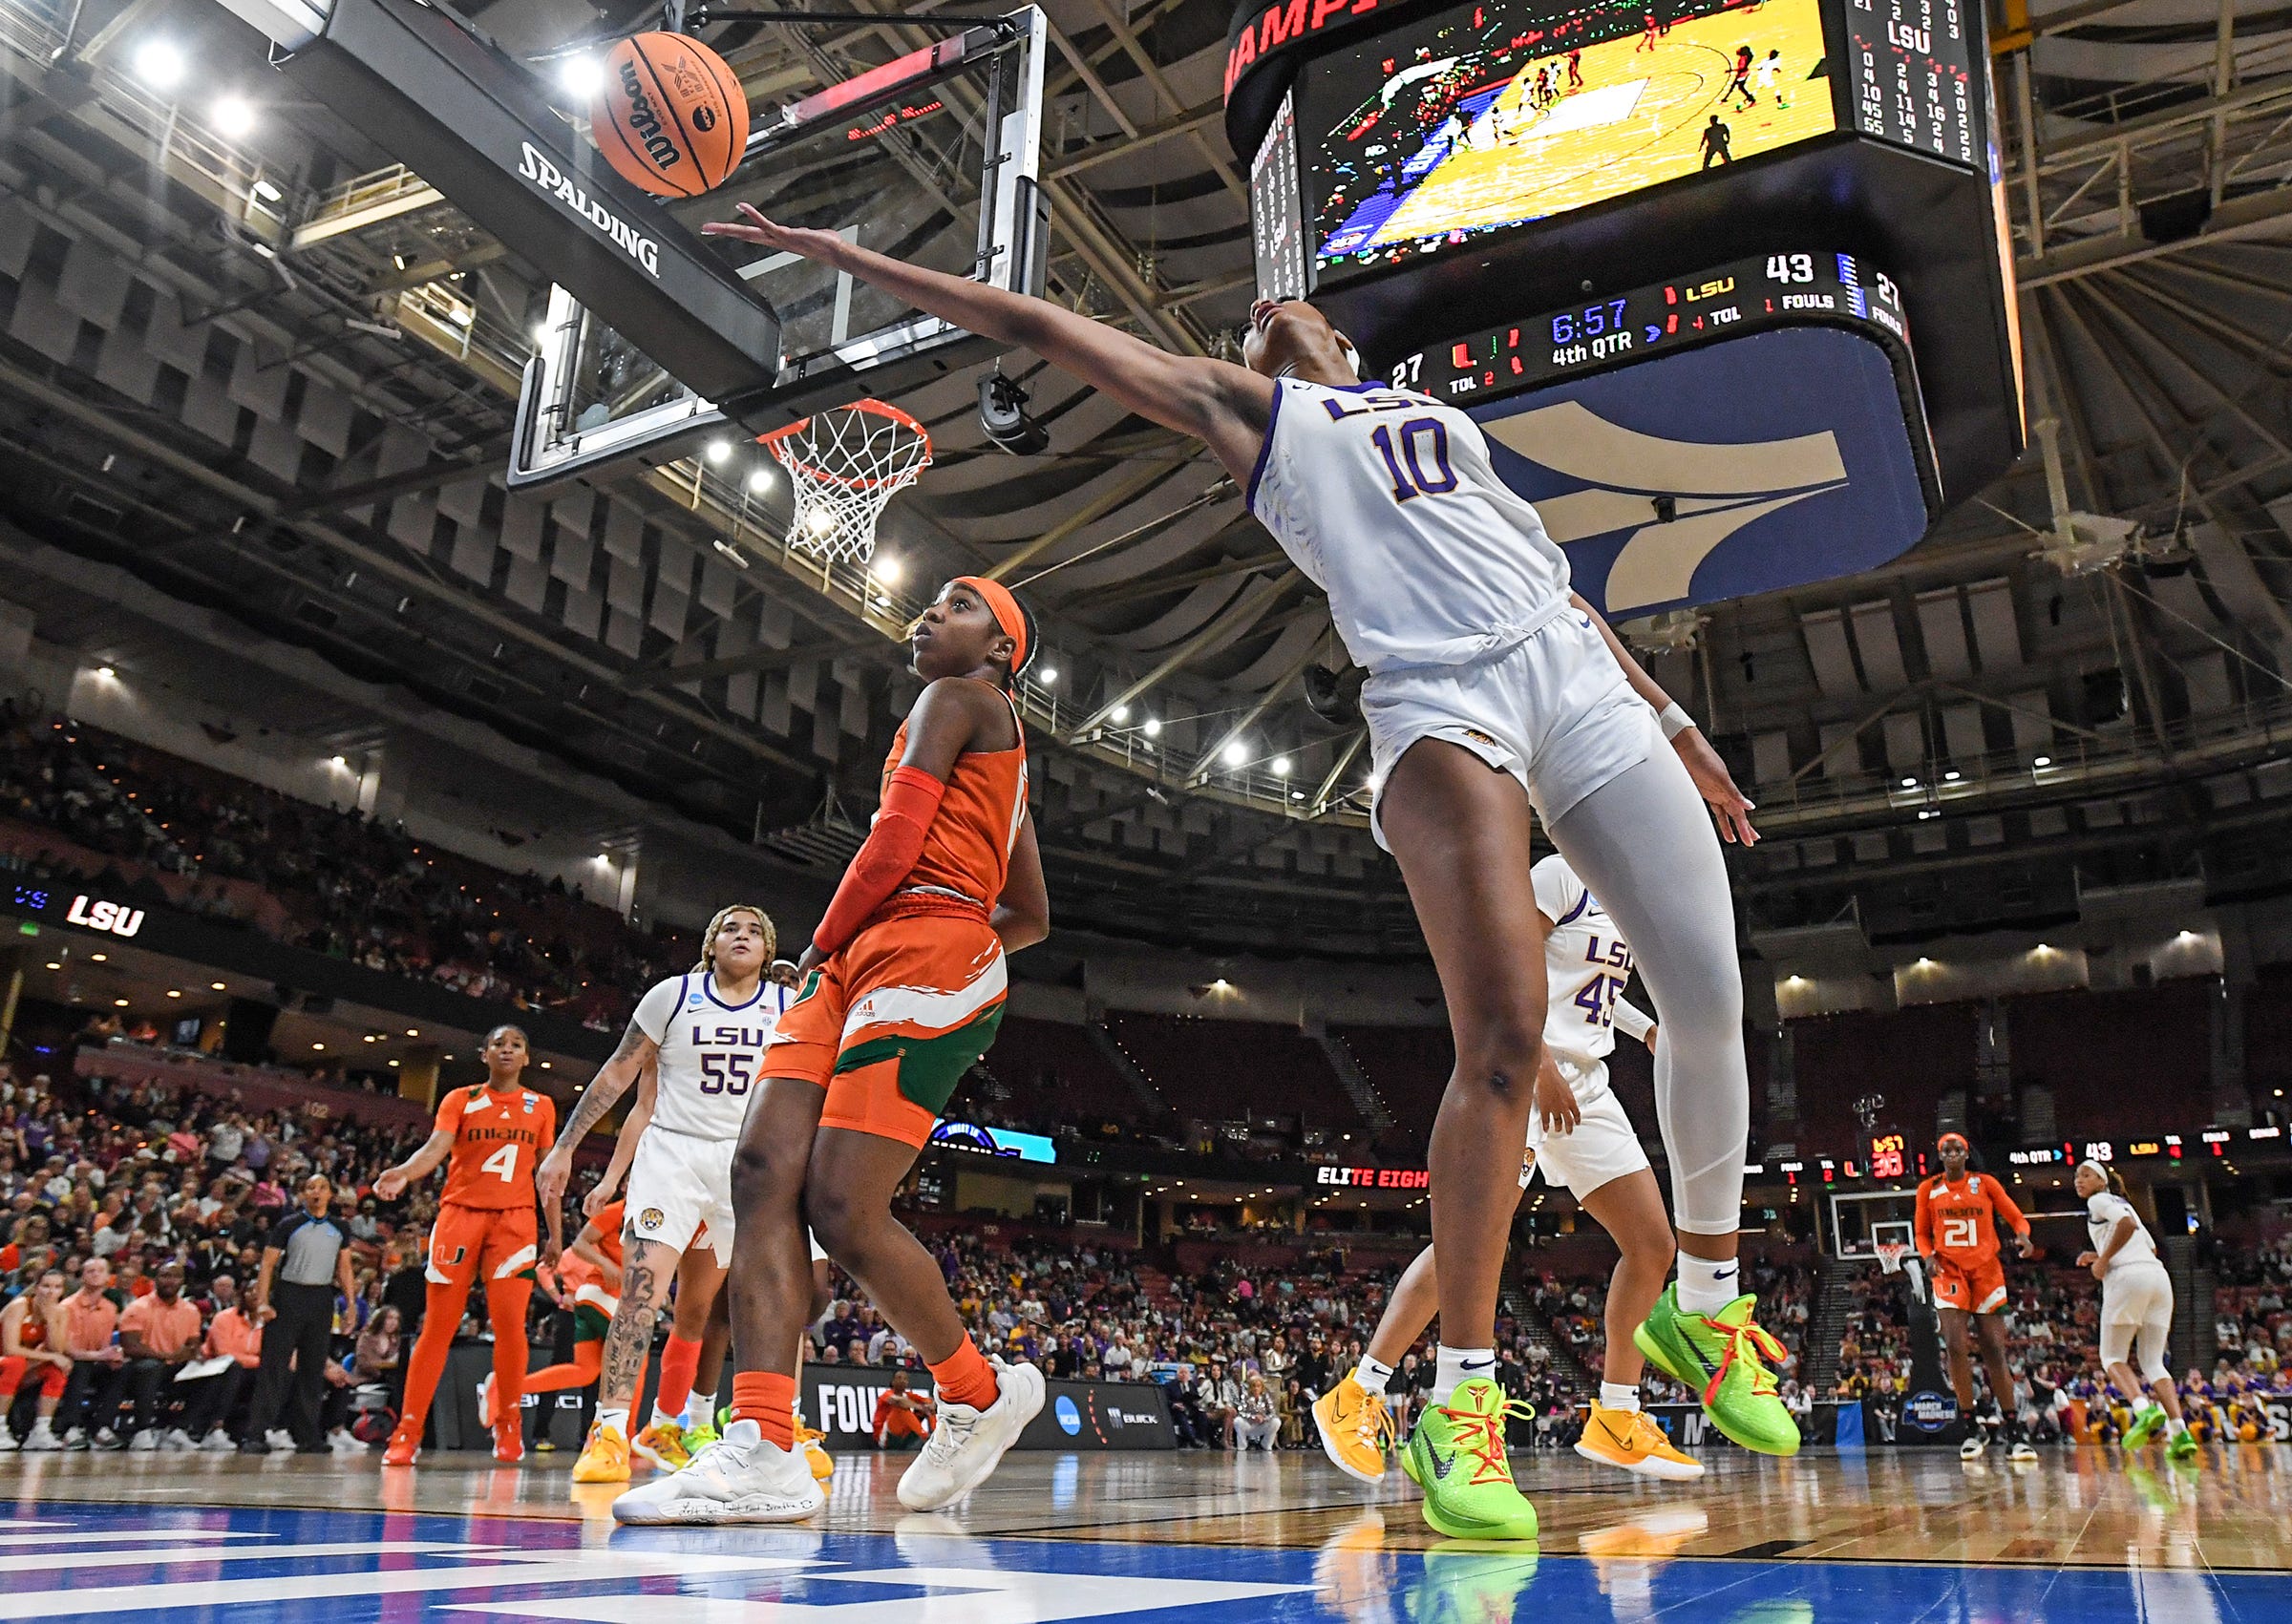 Louisiana State University forward Angel Reese (10) rebounds during the fourth quarter of the Elite Eight NCAA Women's Basketball Tournament game at the Bon Secours Wellness Arena in Greenville, S.C. Sunday, March 26, 2023. LSU beat Miami 54-42.